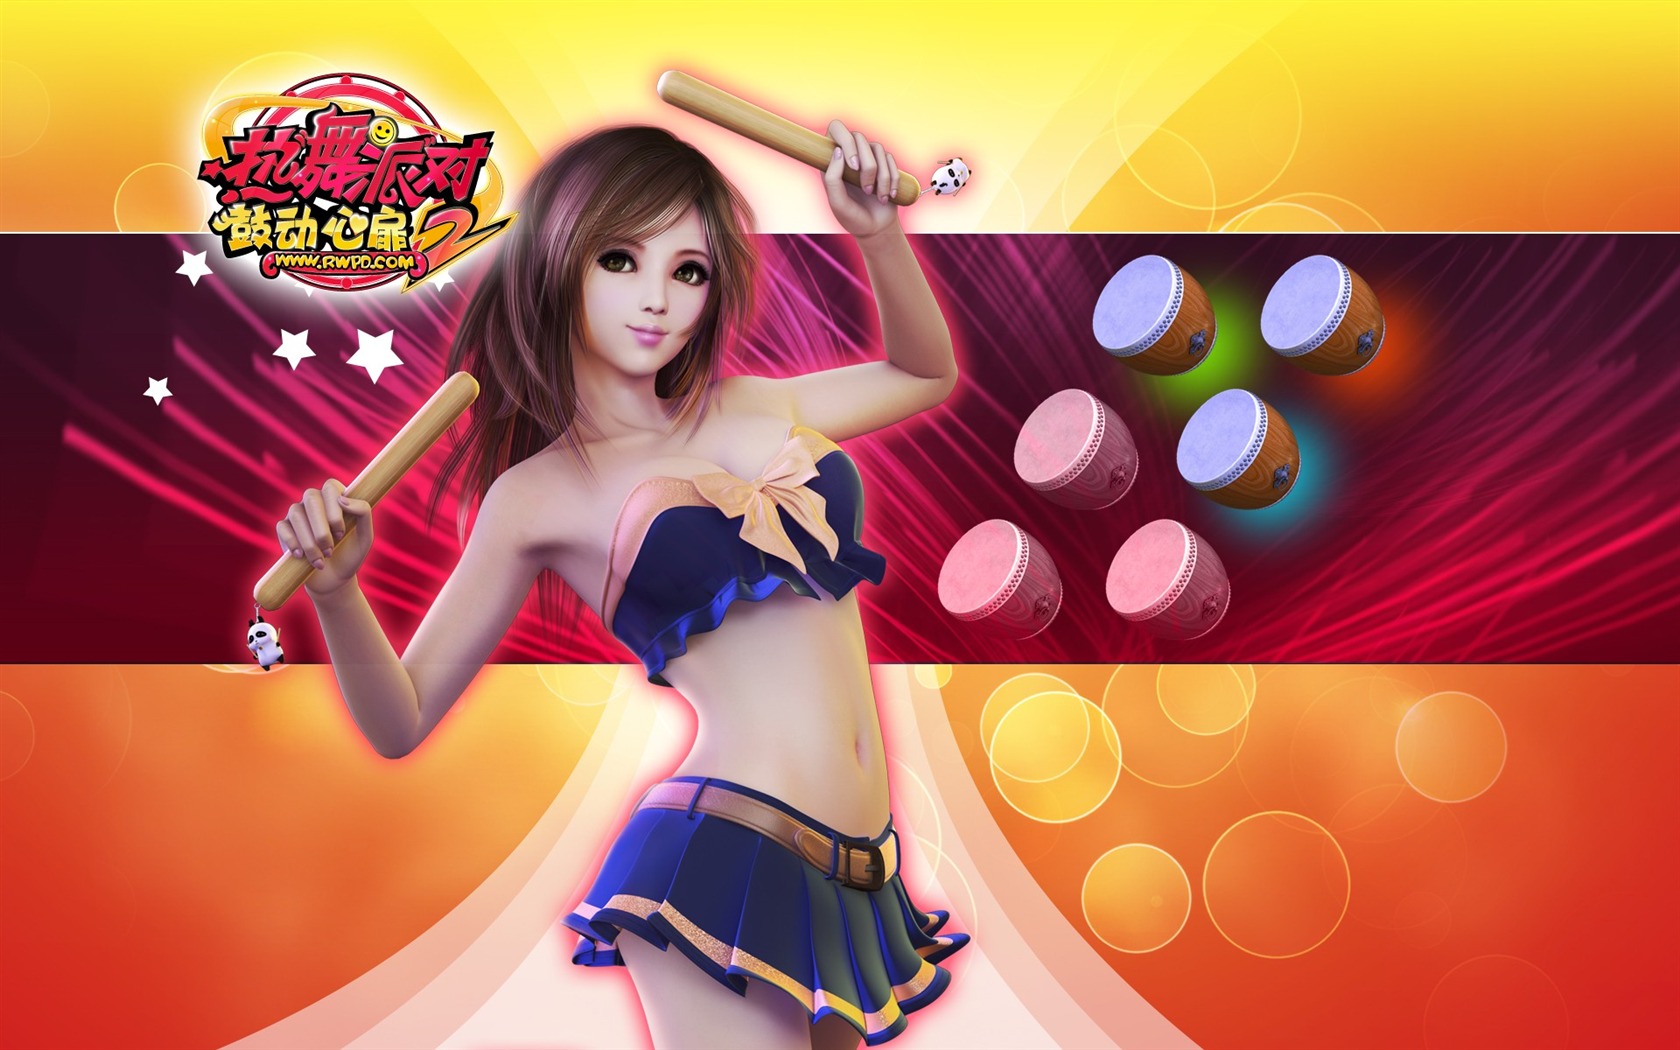 Online game Hot Dance Party II official wallpapers #13 - 1680x1050